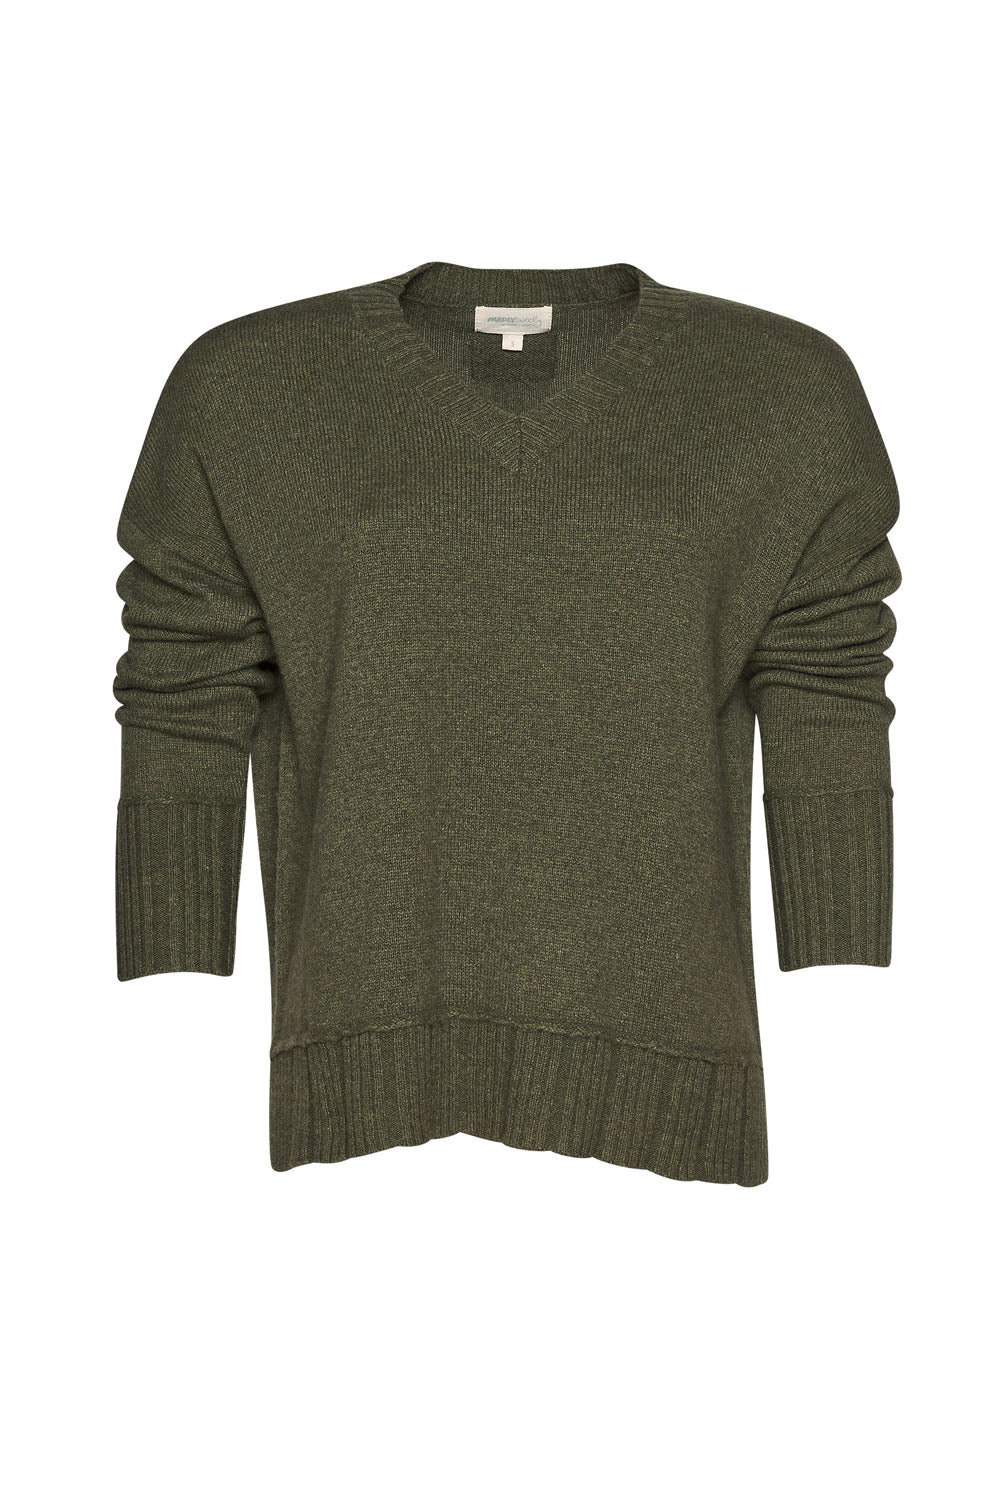 MADLY SWEETLY GIRLS CLUB SWEATER - OLIVE - THE VOGUE STORE